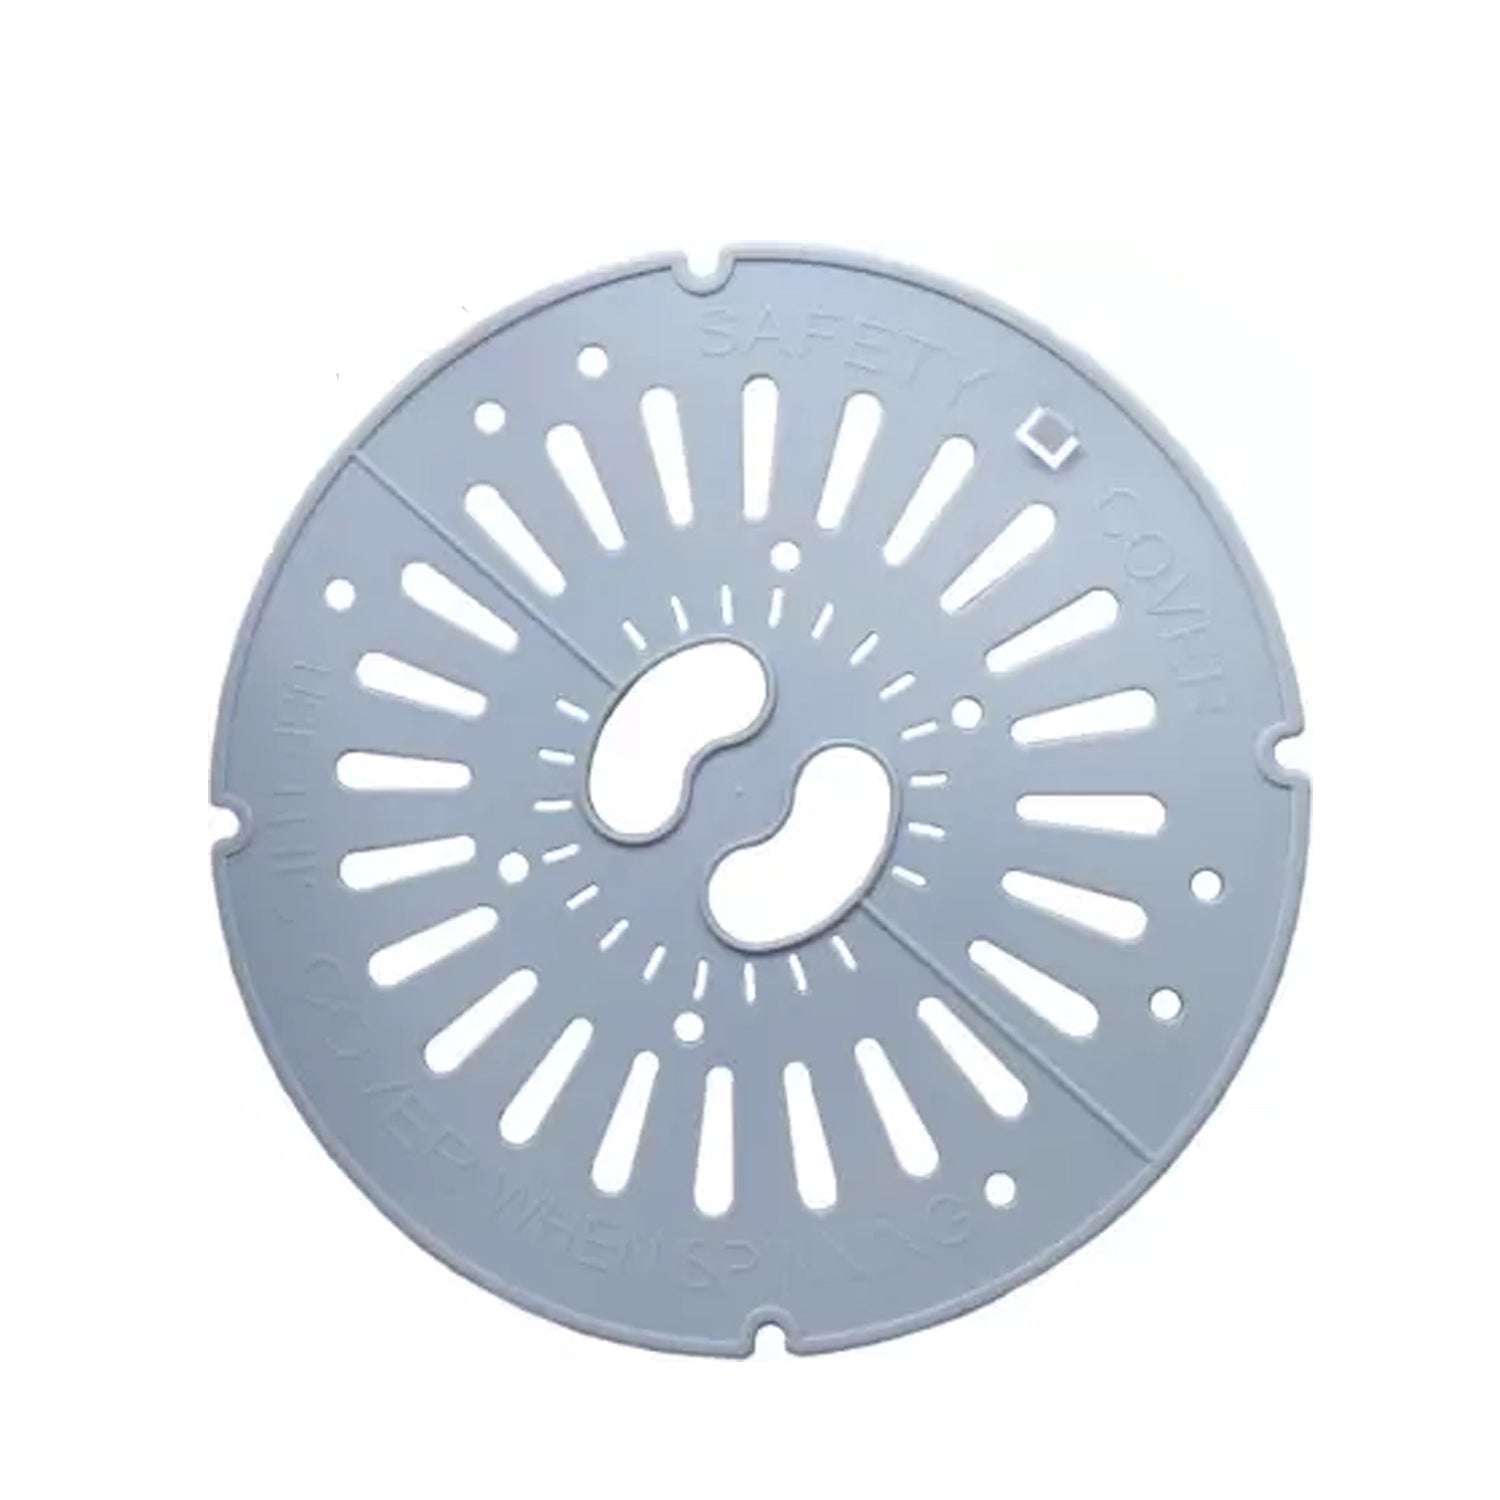 Universal Fit Top Load Semi Automatic Washing Machine Spin Safety Cover/Spinner Cap/Dryer Safety Cover/Lid & Plate (1 pc)